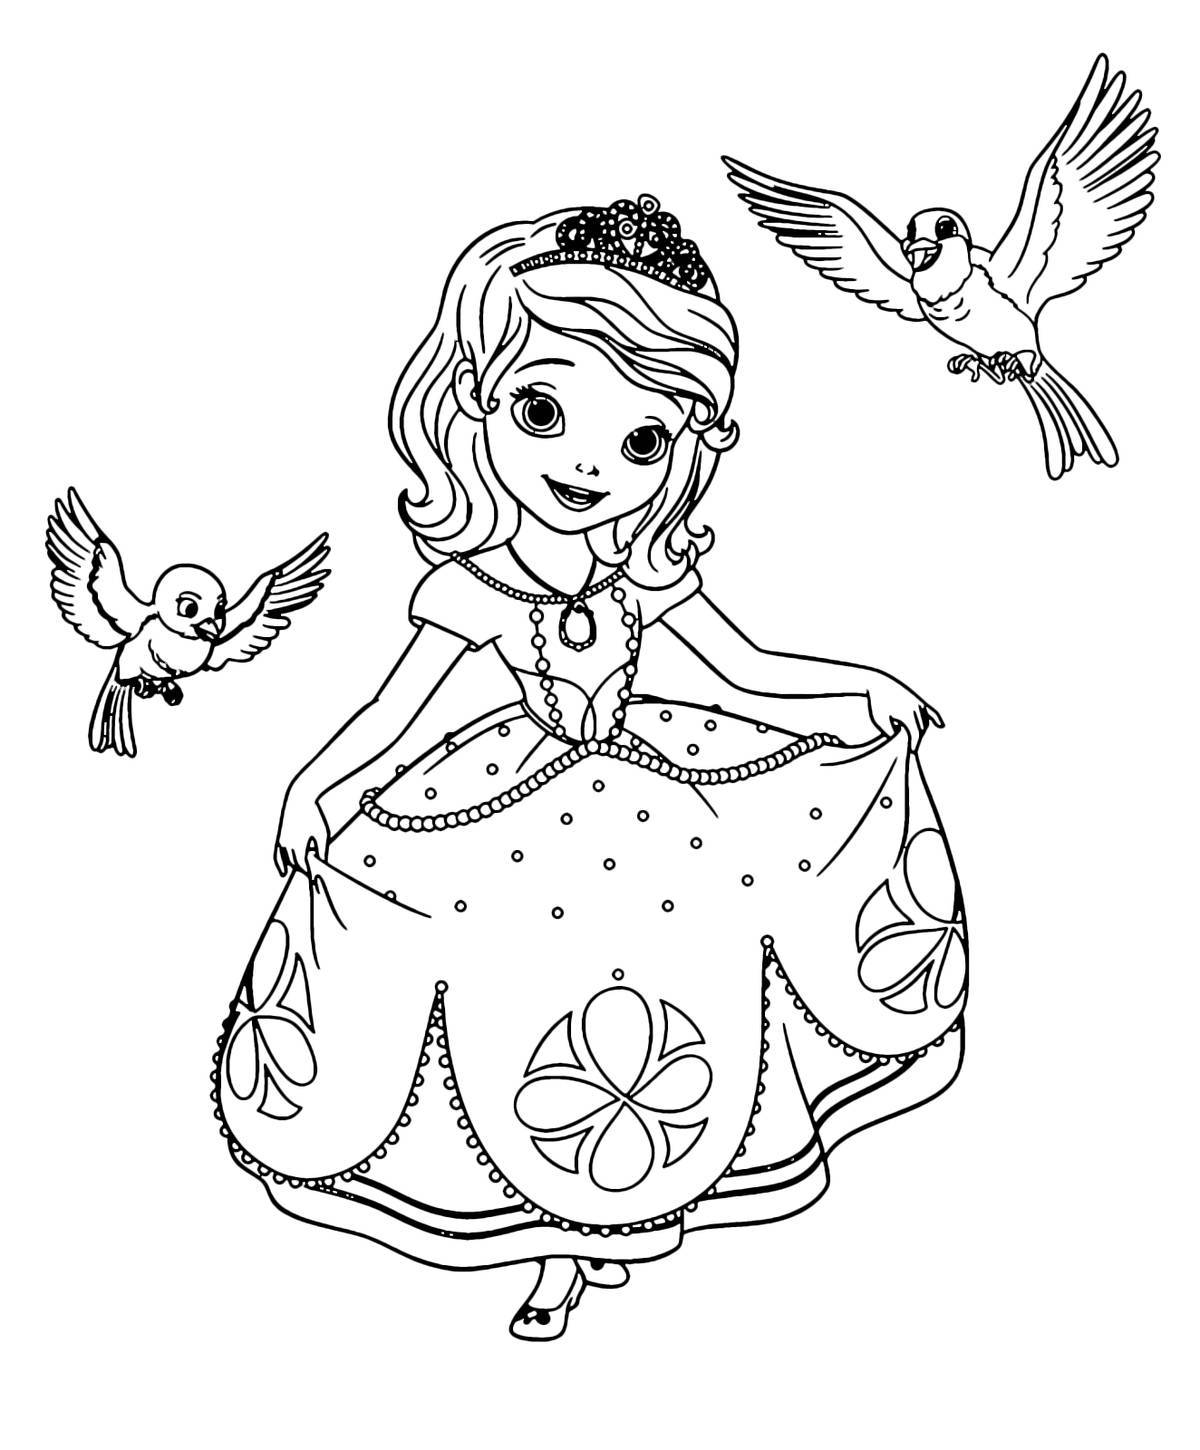 Fancy princess coloring pages for kids